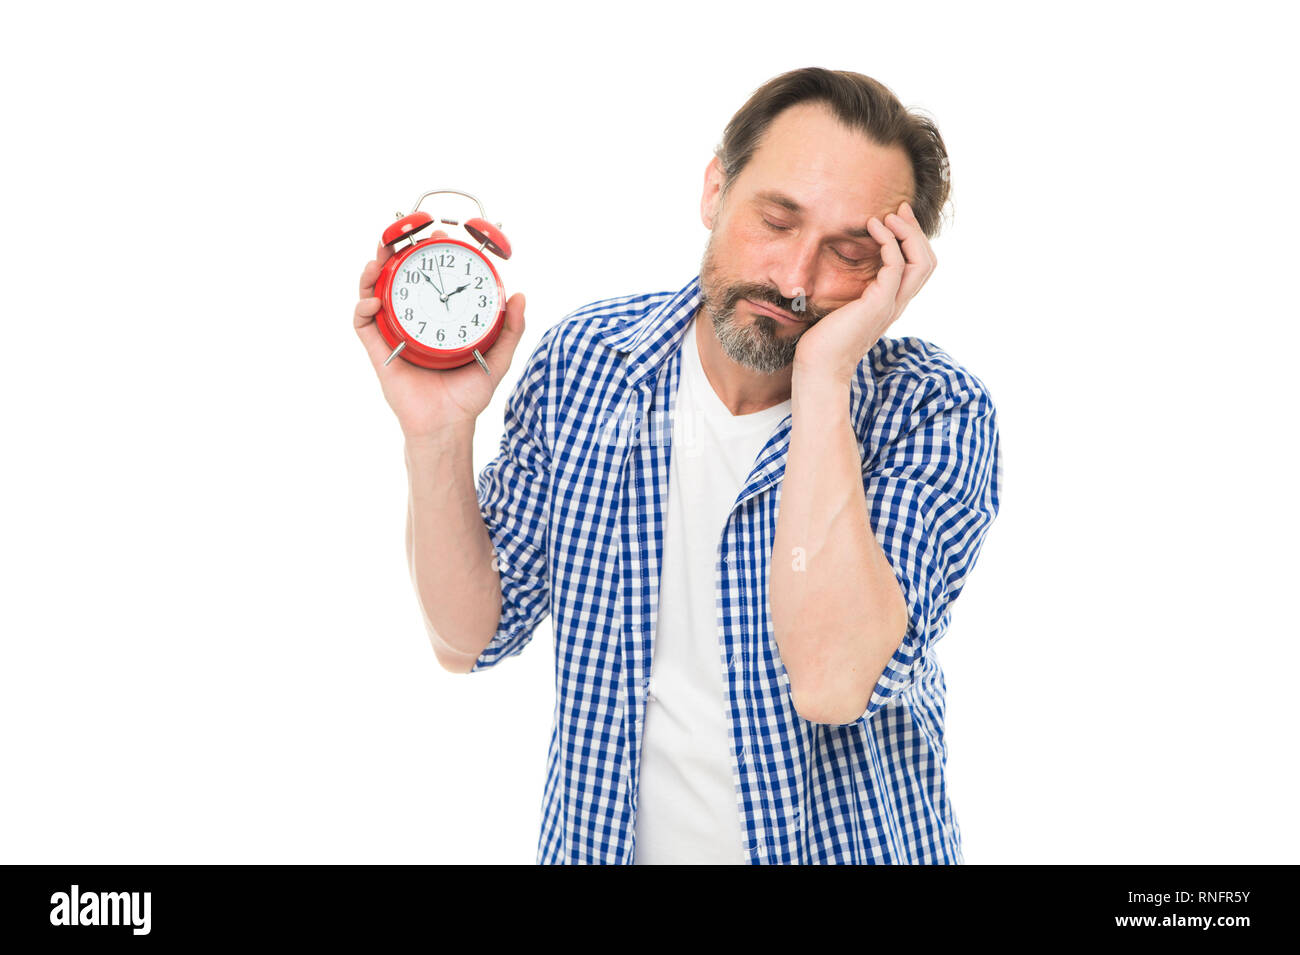 Take control of time. Self discipline concept. How to avoid being late. Being late is habit. Figure out why you are always late. Man bearded mature guy hold alarm clock. Time management skill. Stock Photo